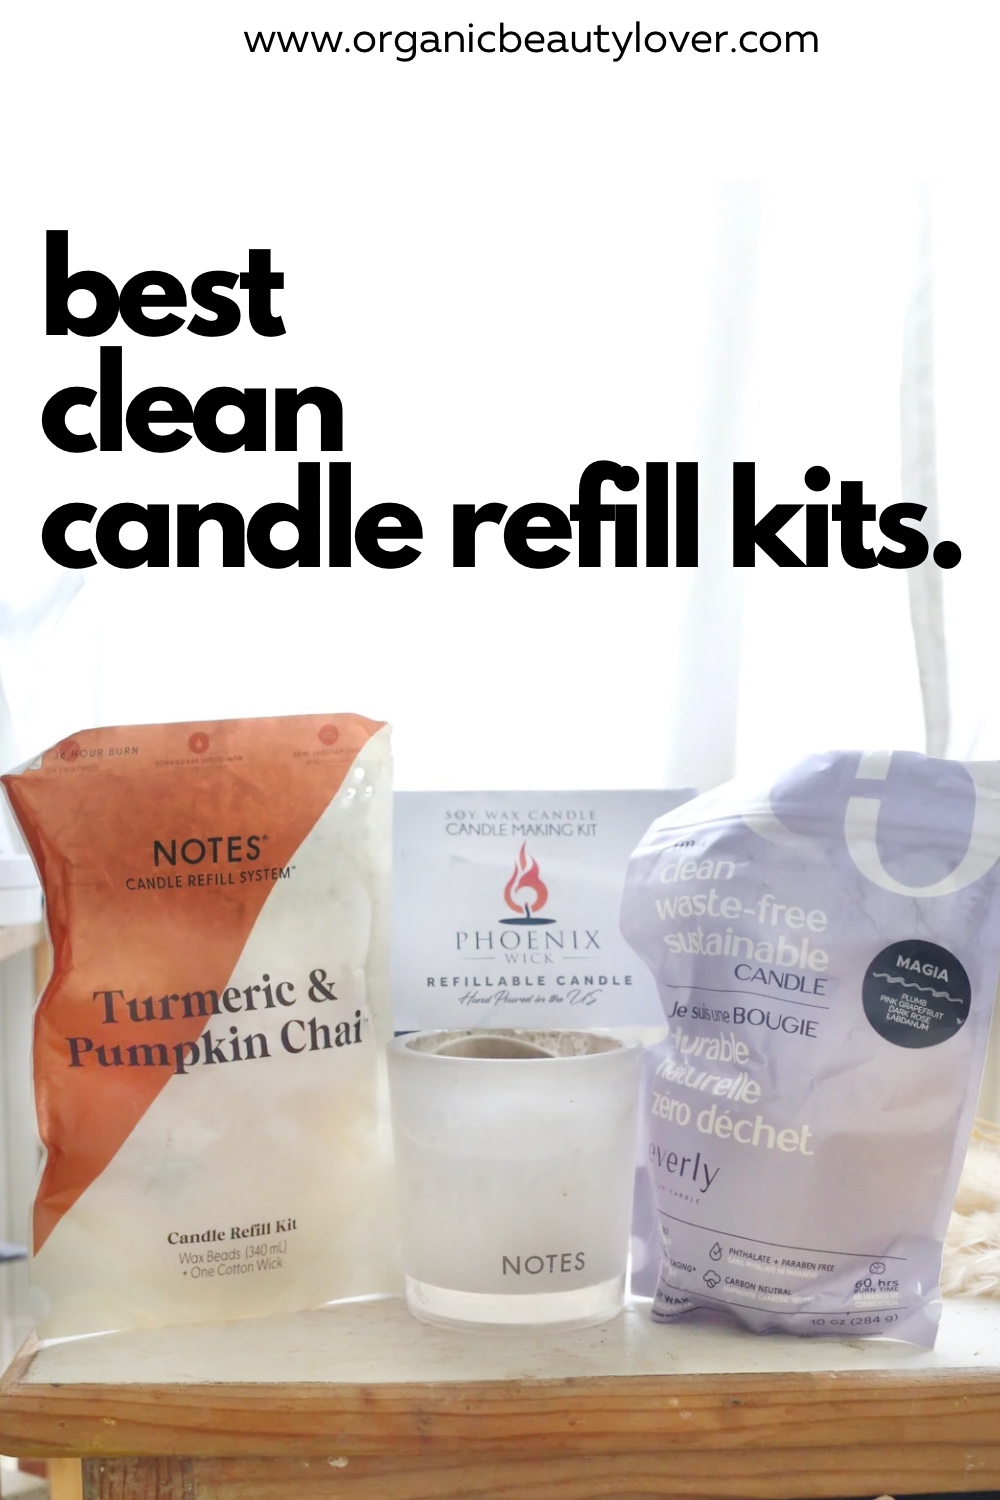 Best Non Toxic Candle Making Kits (my fave way to refill candle jars!) -  Organic Beauty Lover